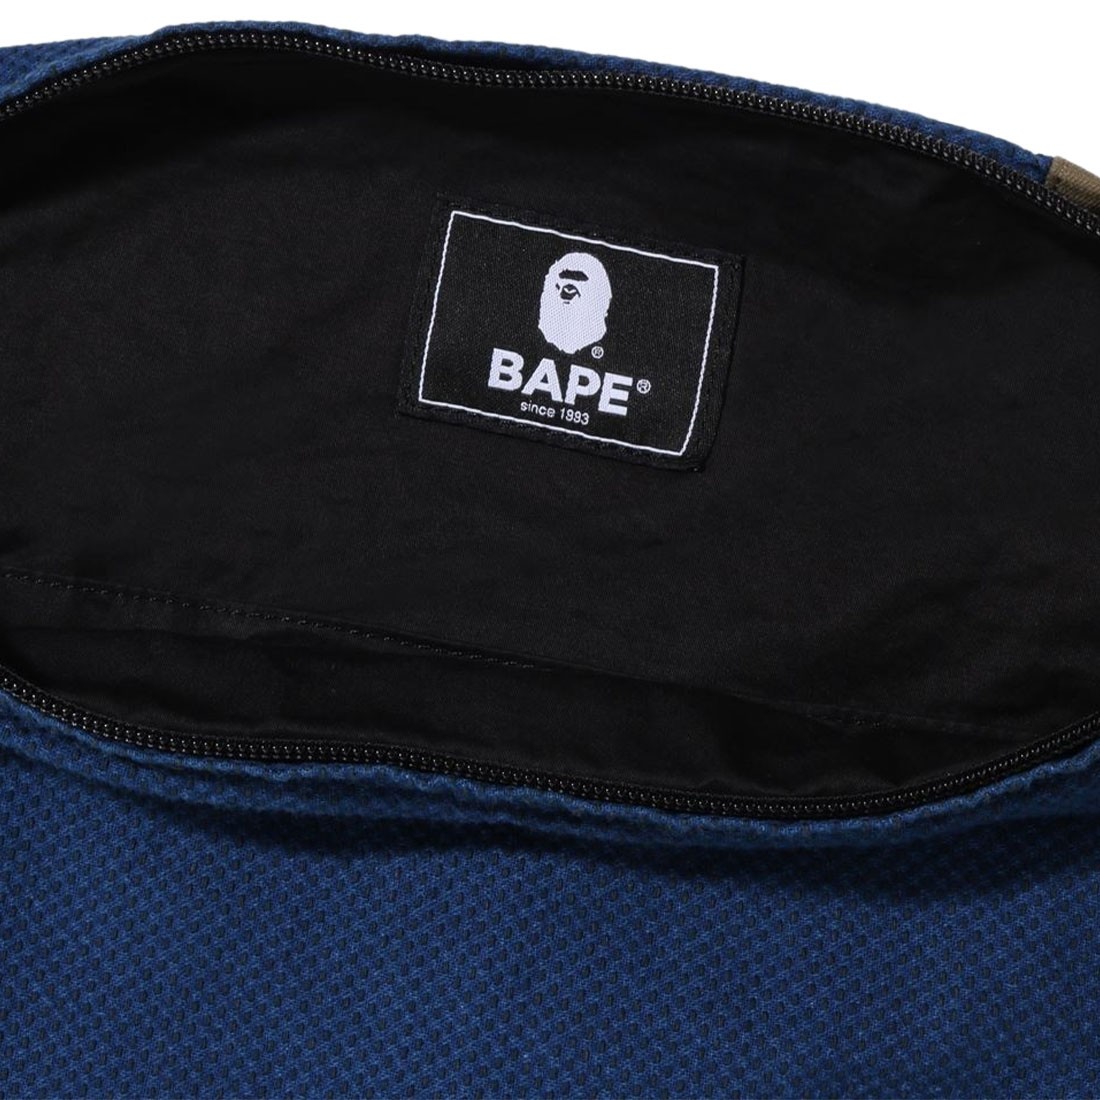 zip hand bag closed trapping air inside